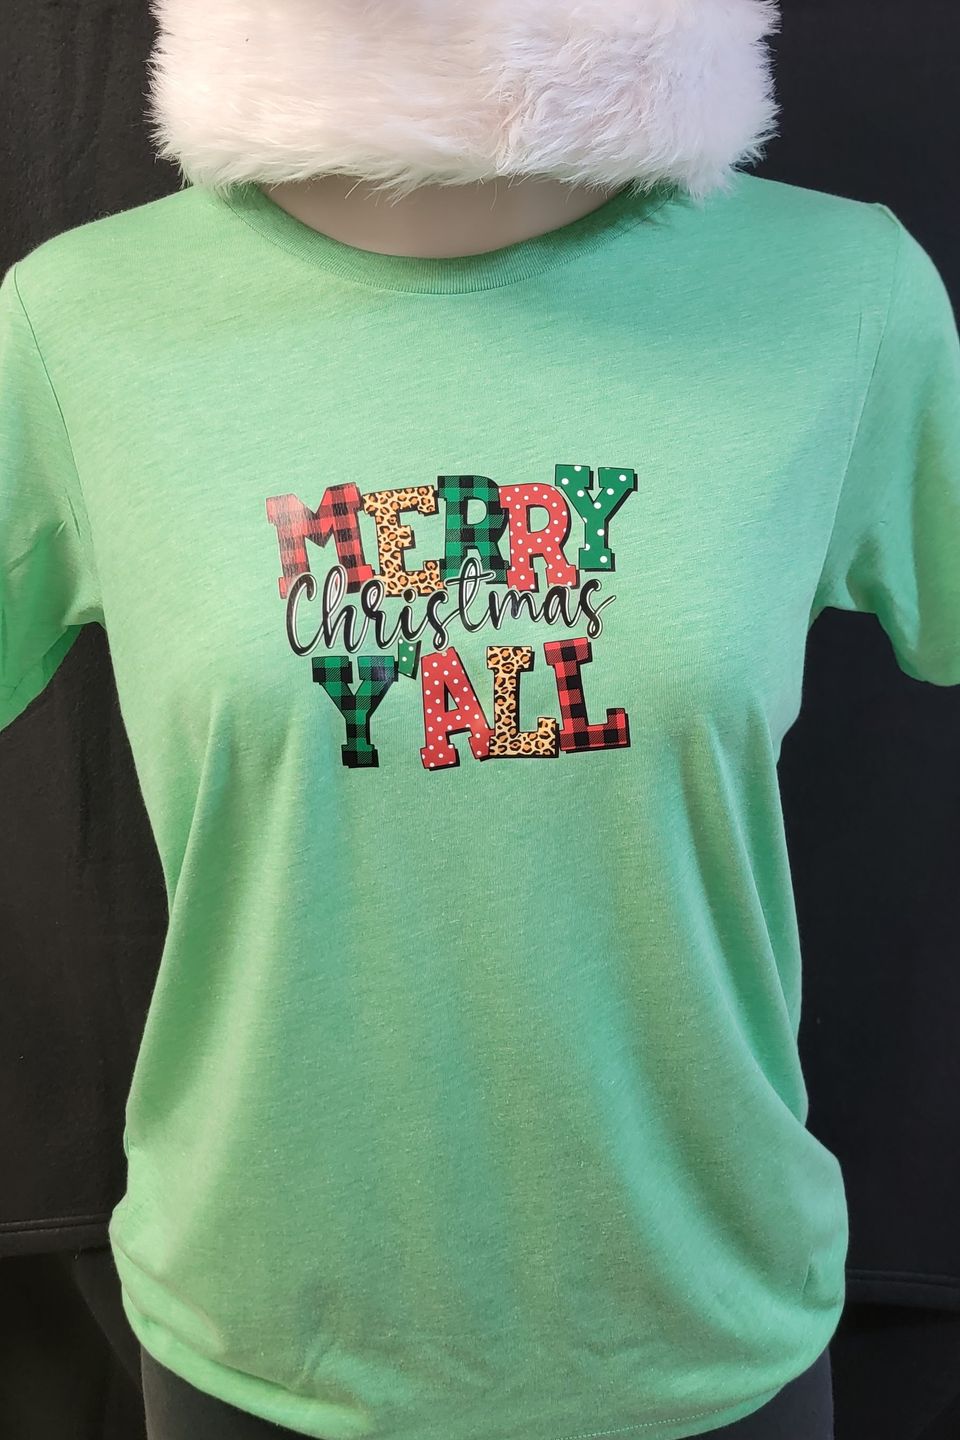 "DTF Direct-to-Film" example from SaRi's Creations - "Merry Christmas Y'all" on a green t-shirt